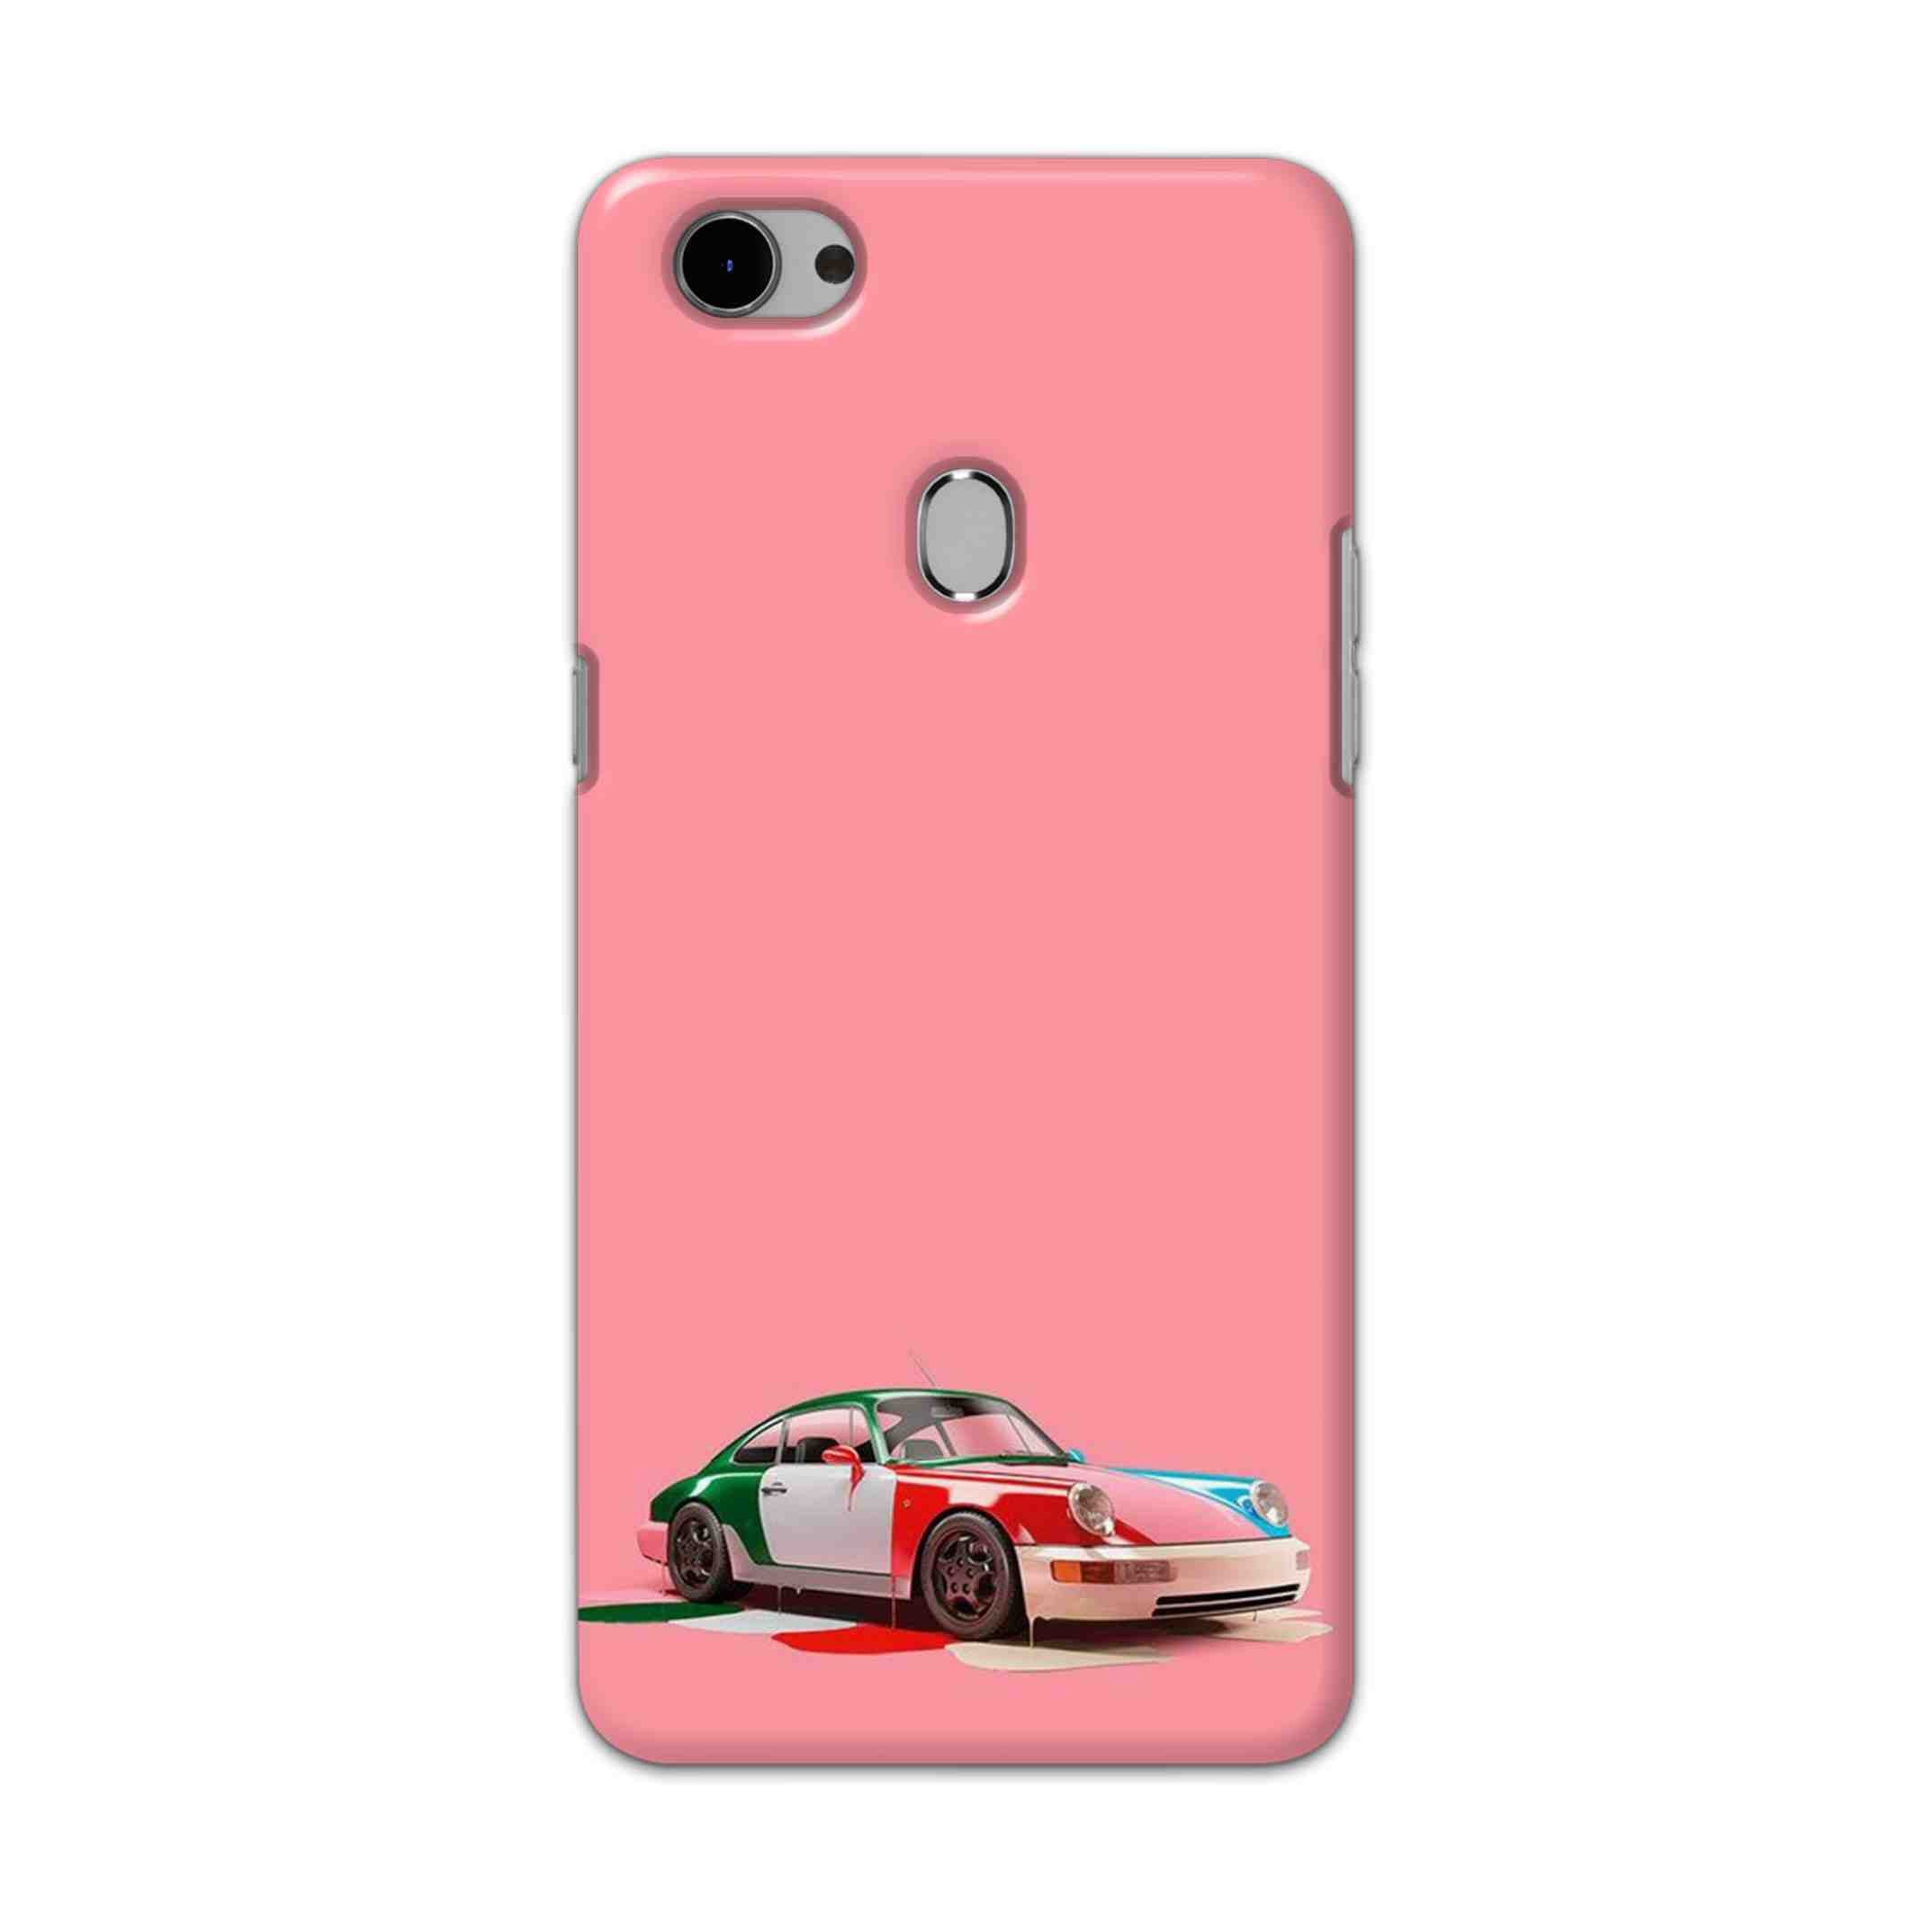 Buy Pink Porche Hard Back Mobile Phone Case Cover For Oppo F7 Online